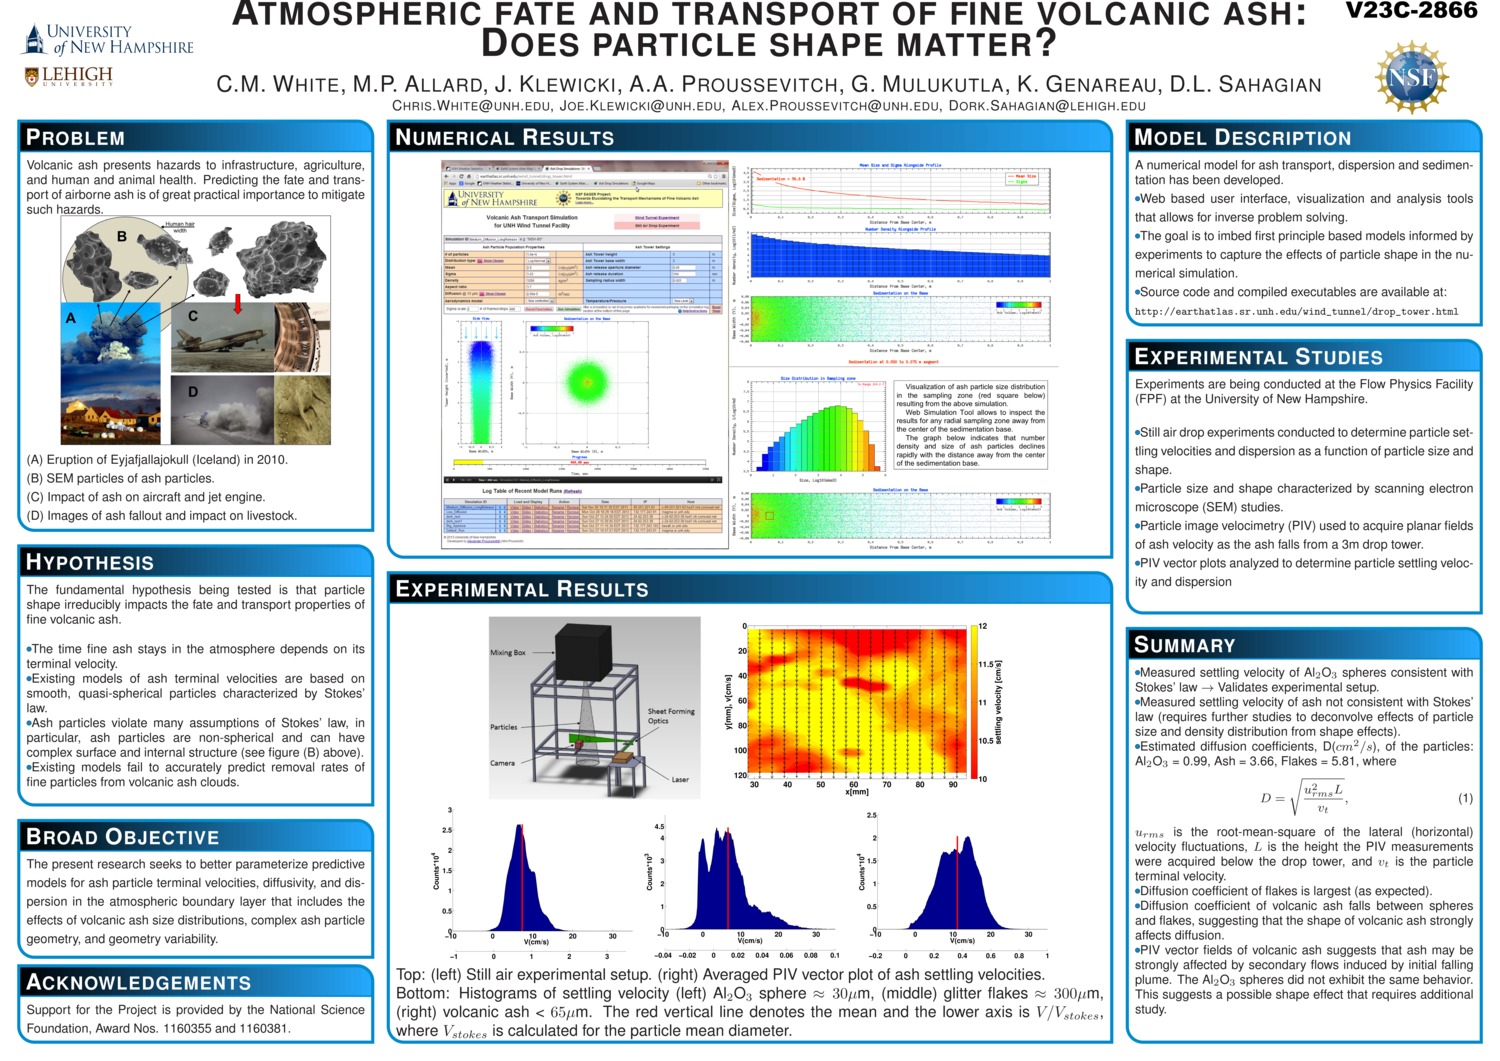 Atmospheric Fate And Transport Of Fine Volcanic Ash: Does Particle Shape Matter? by alexp